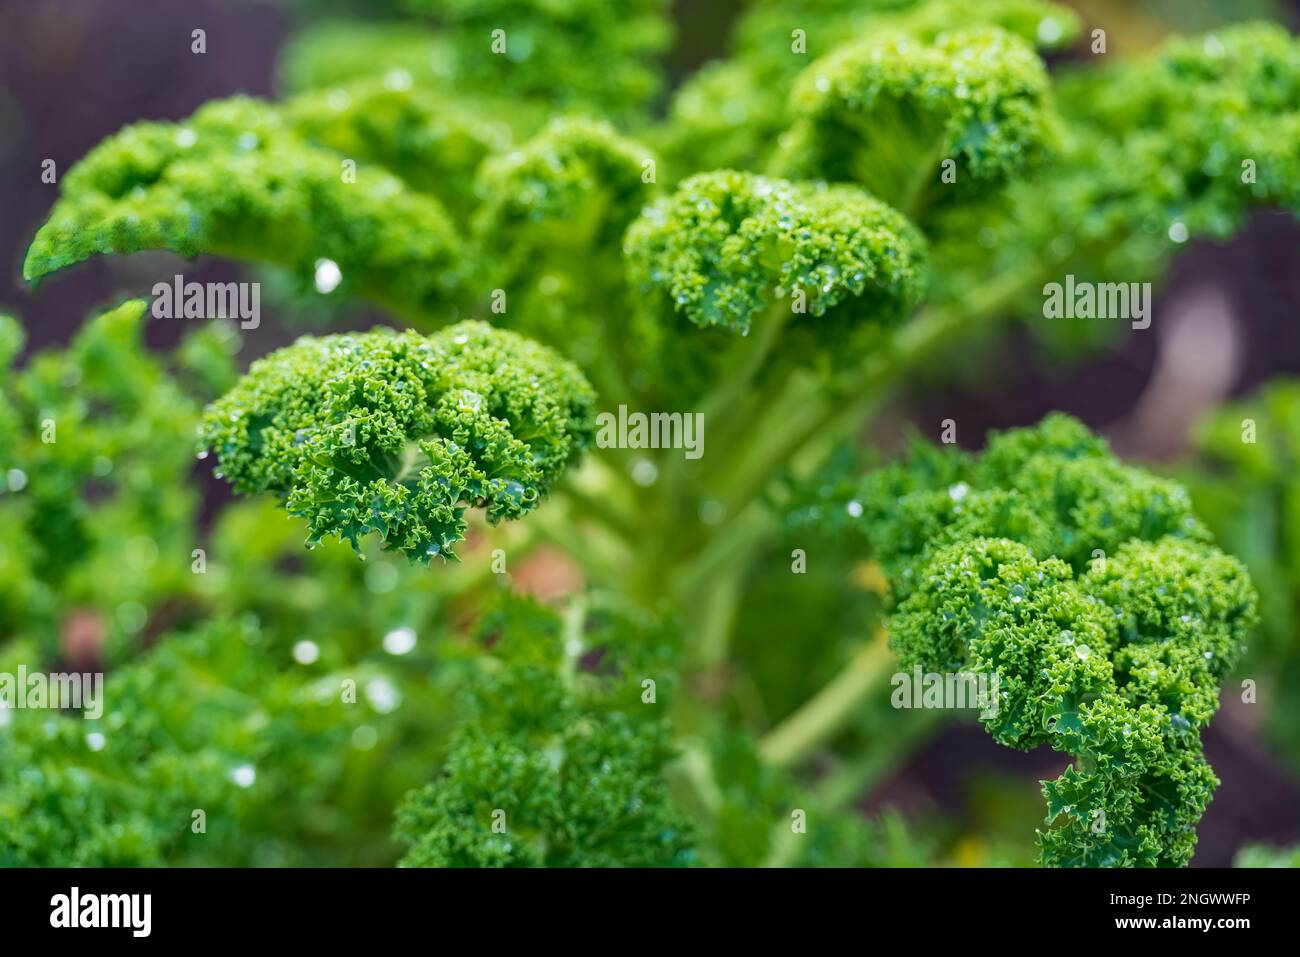 Leaves of fresh green salad with water drops on the garden bed. Selective focus Stock Photo